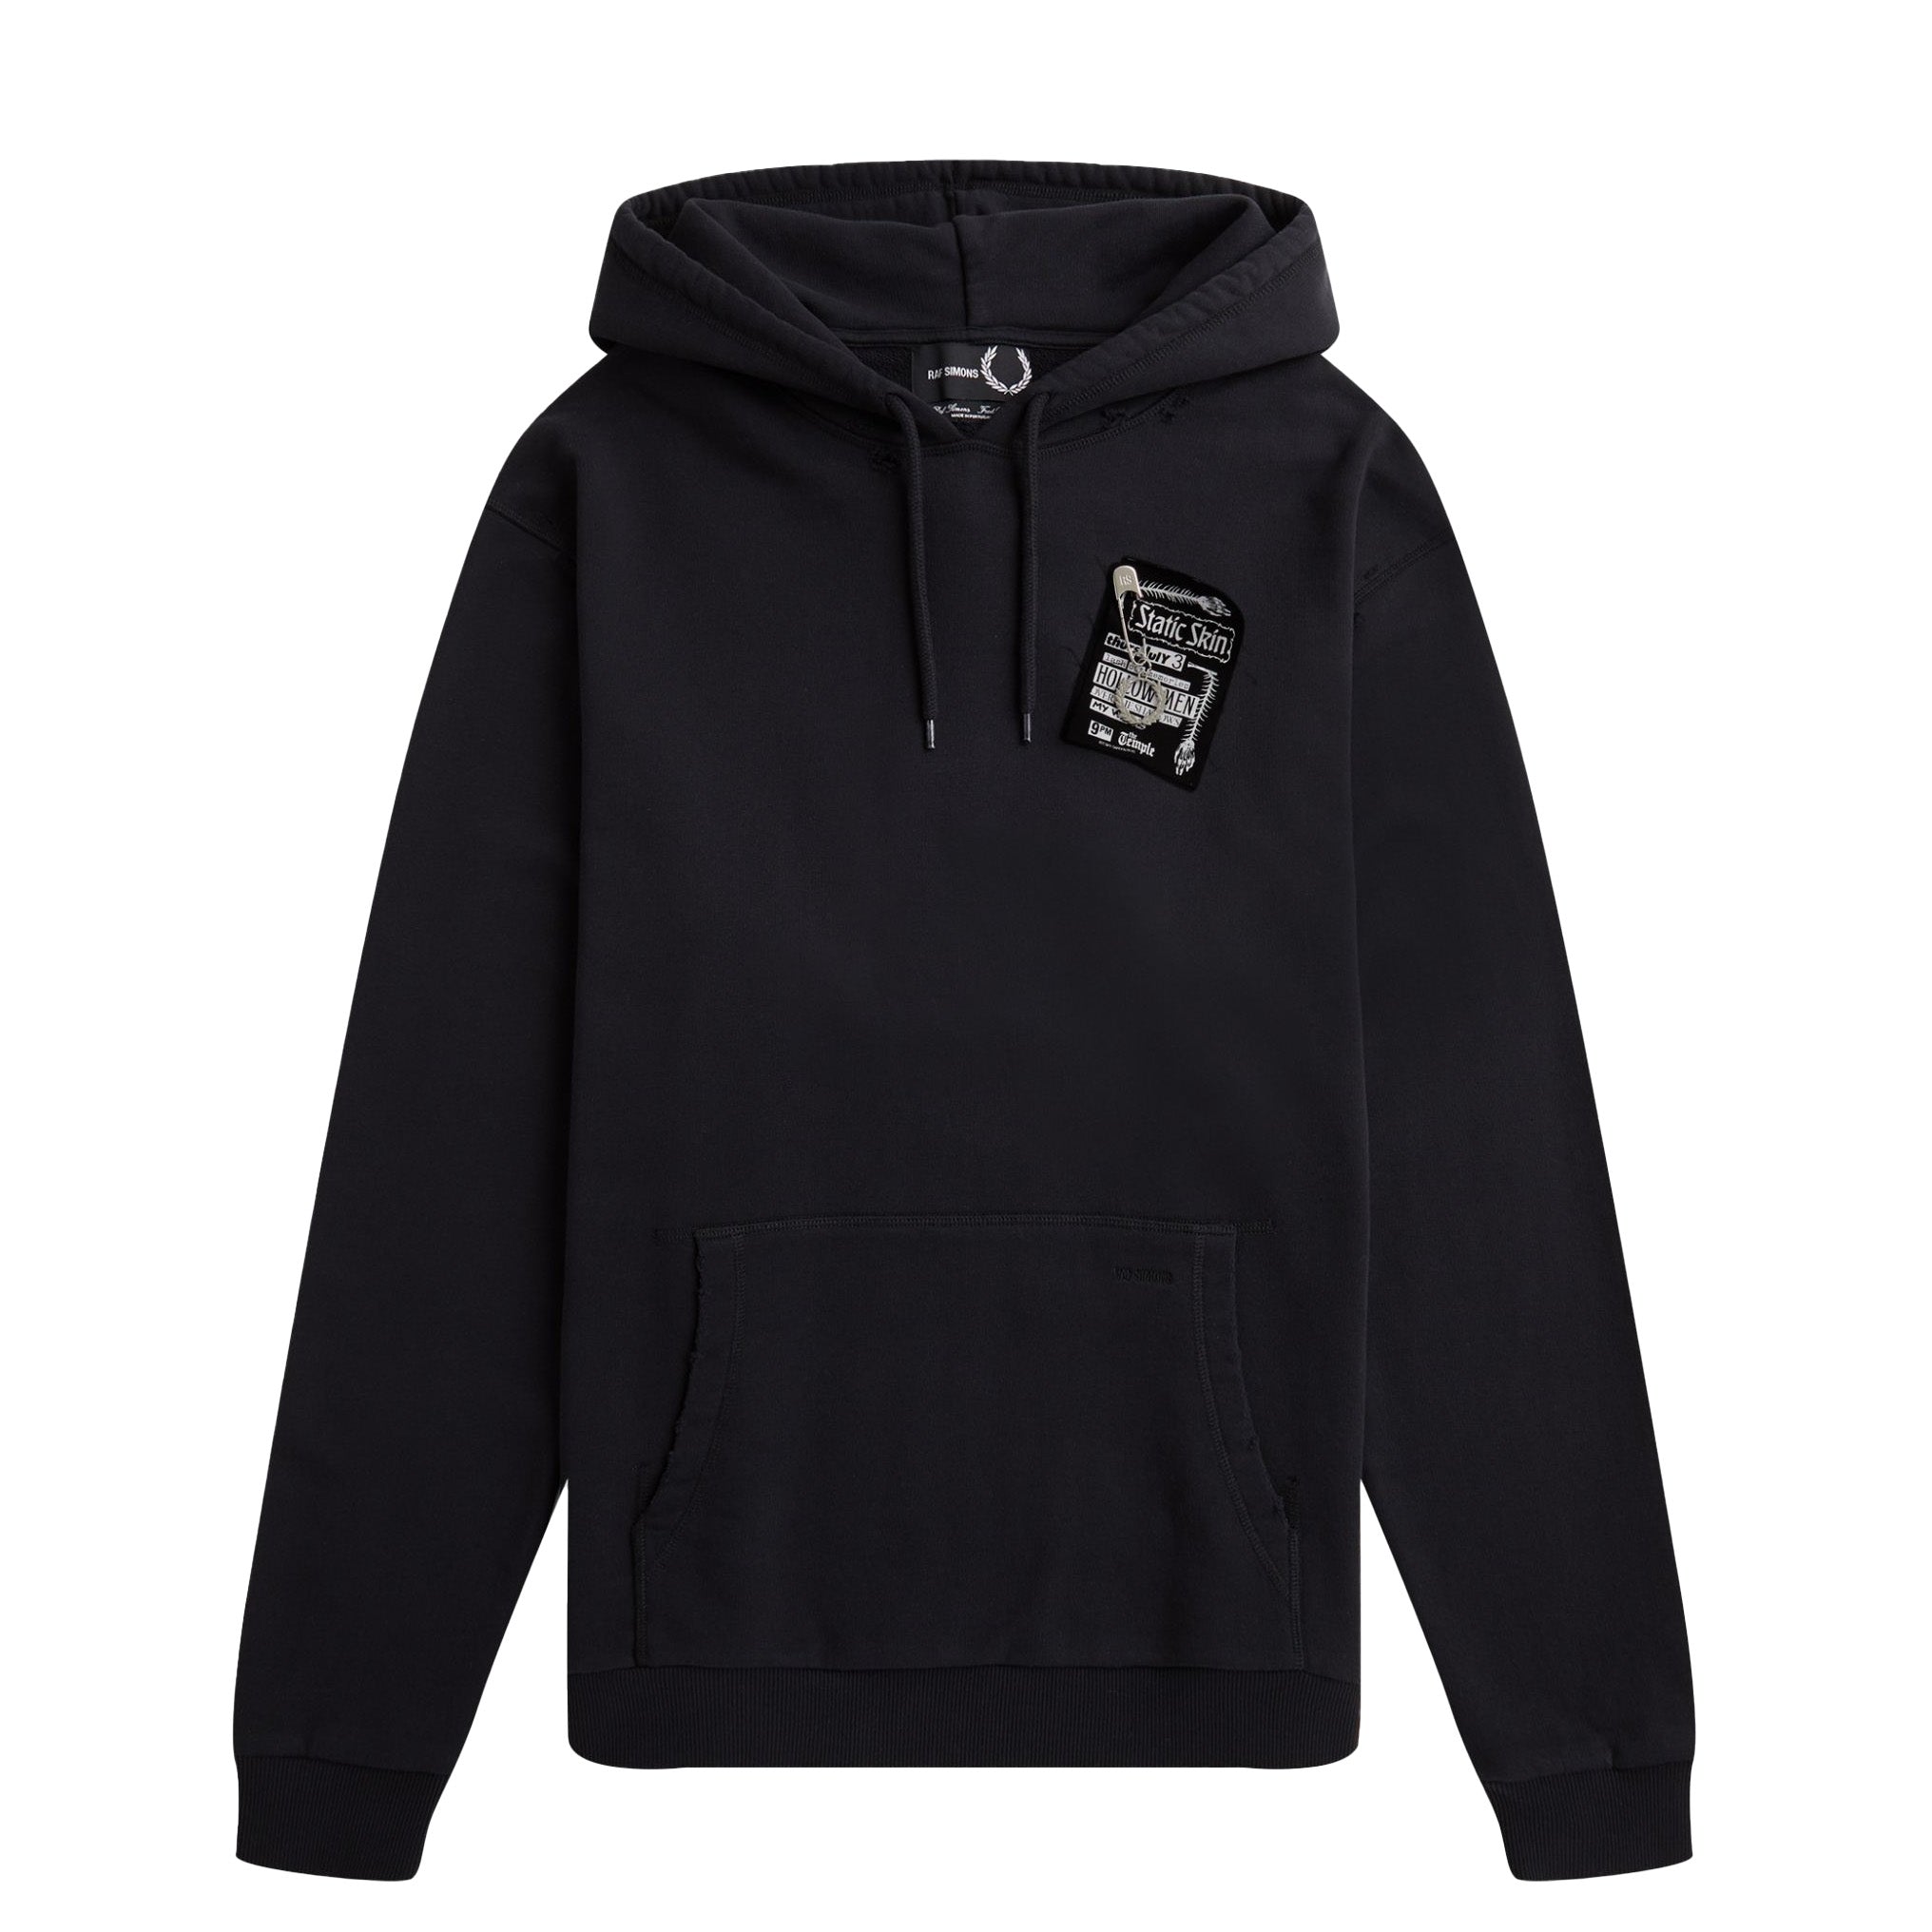 Fred Perry x Raf Simons Destroyed Hoodie Black